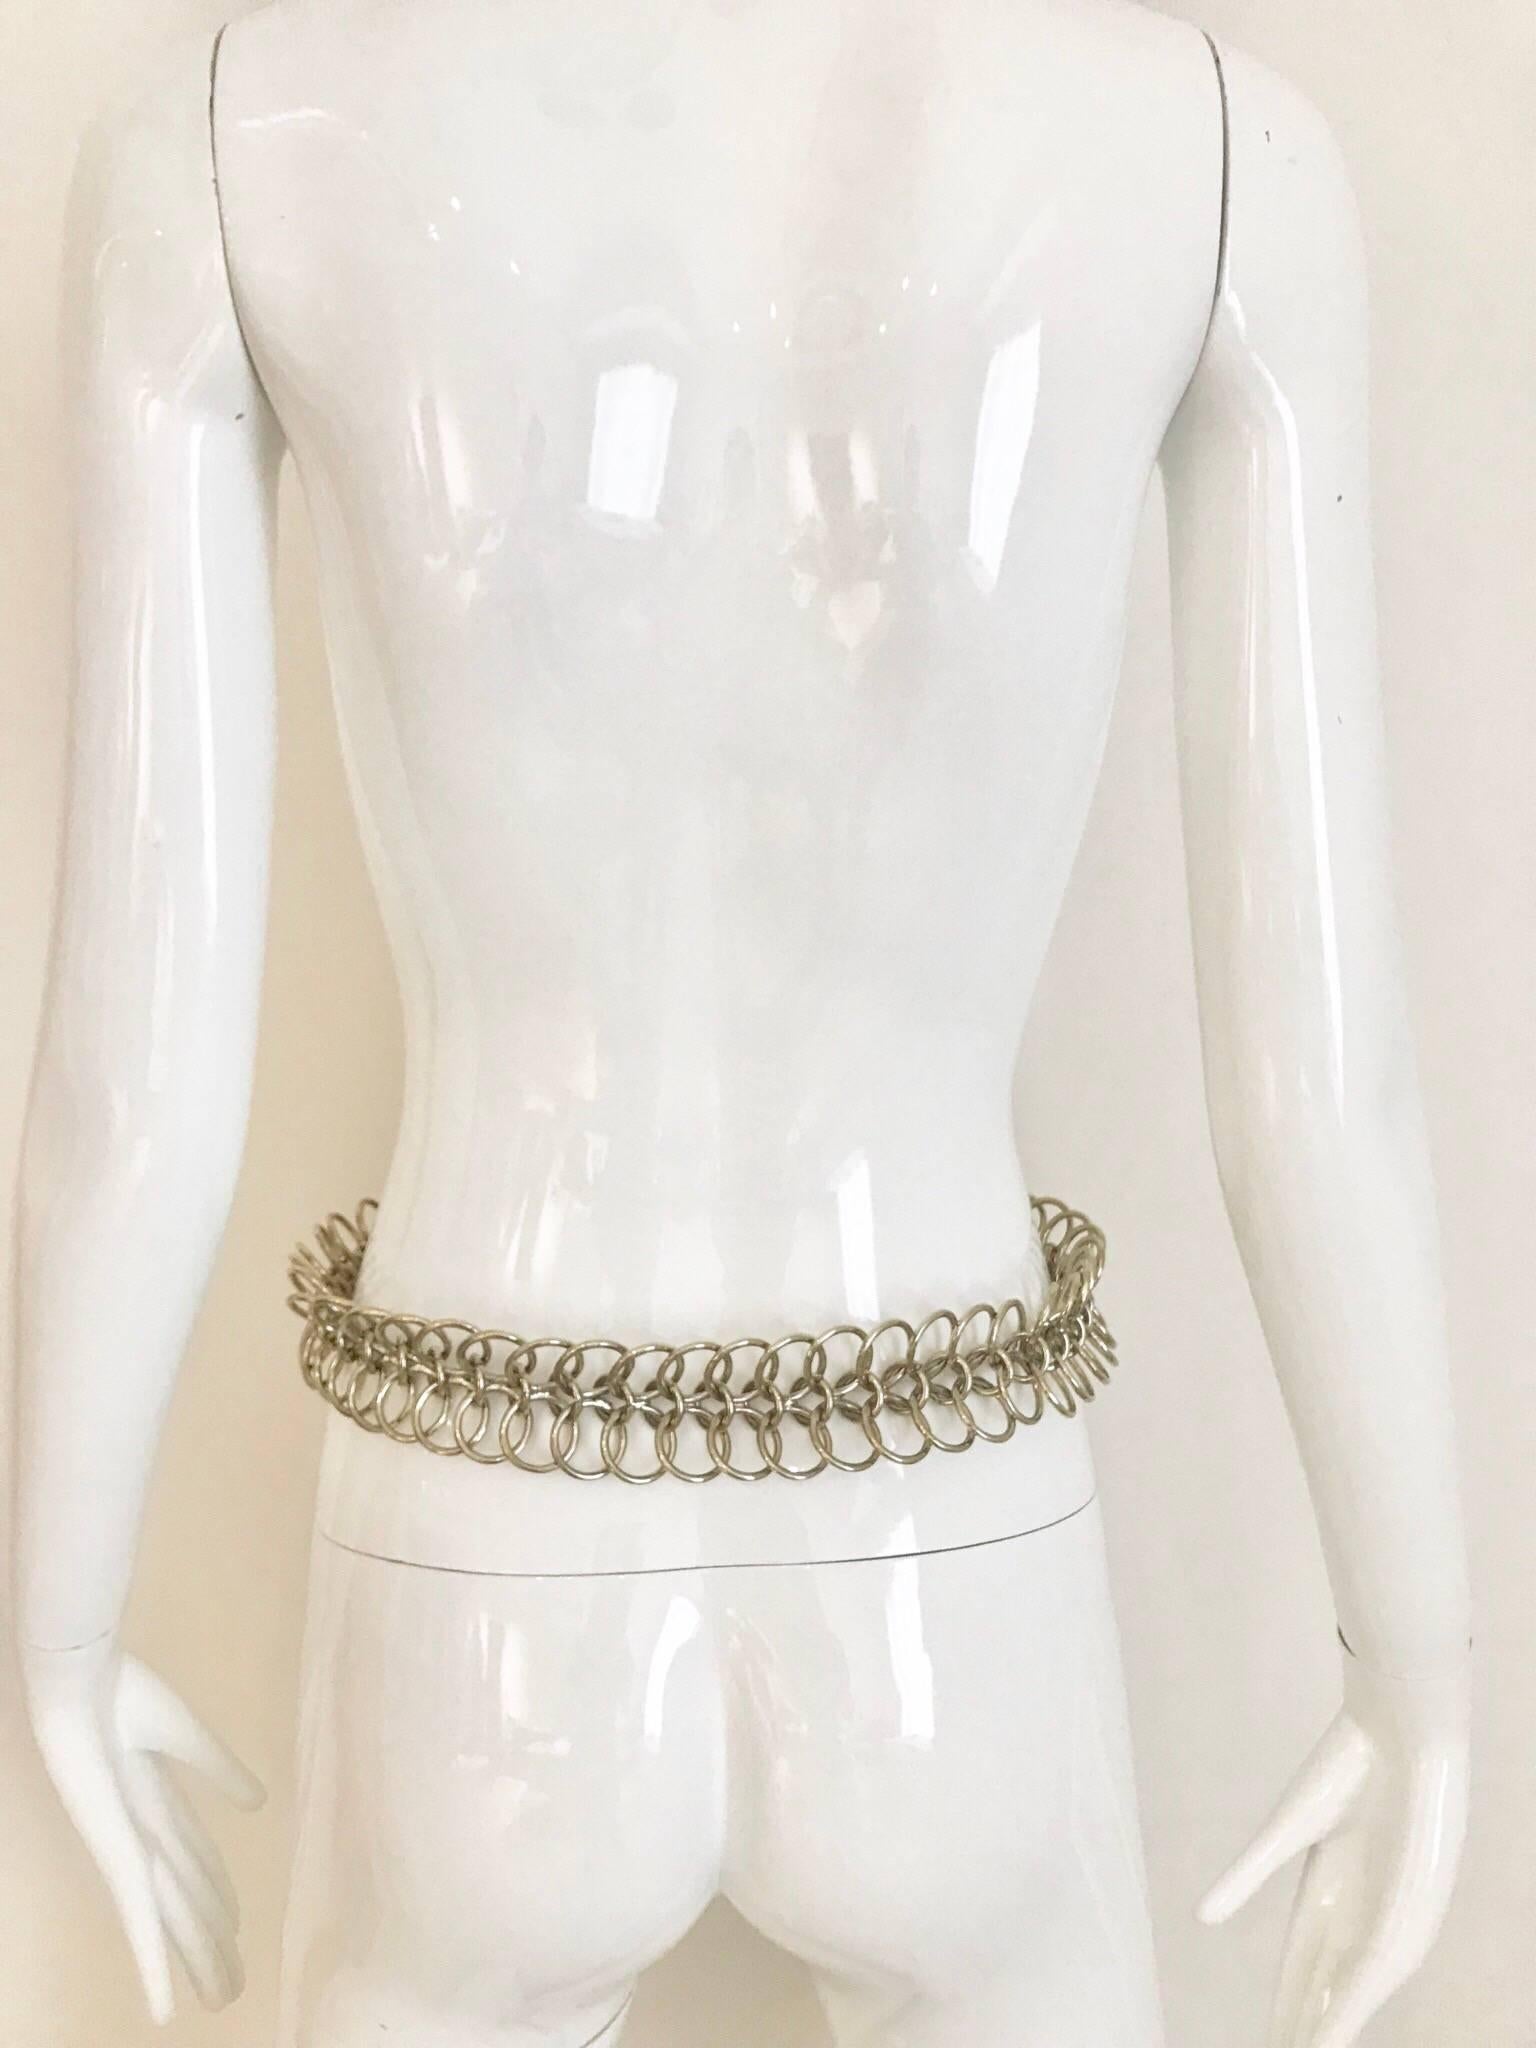 90s Gianfranco Ferre Vintage Belt In Excellent Condition For Sale In Beverly Hills, CA